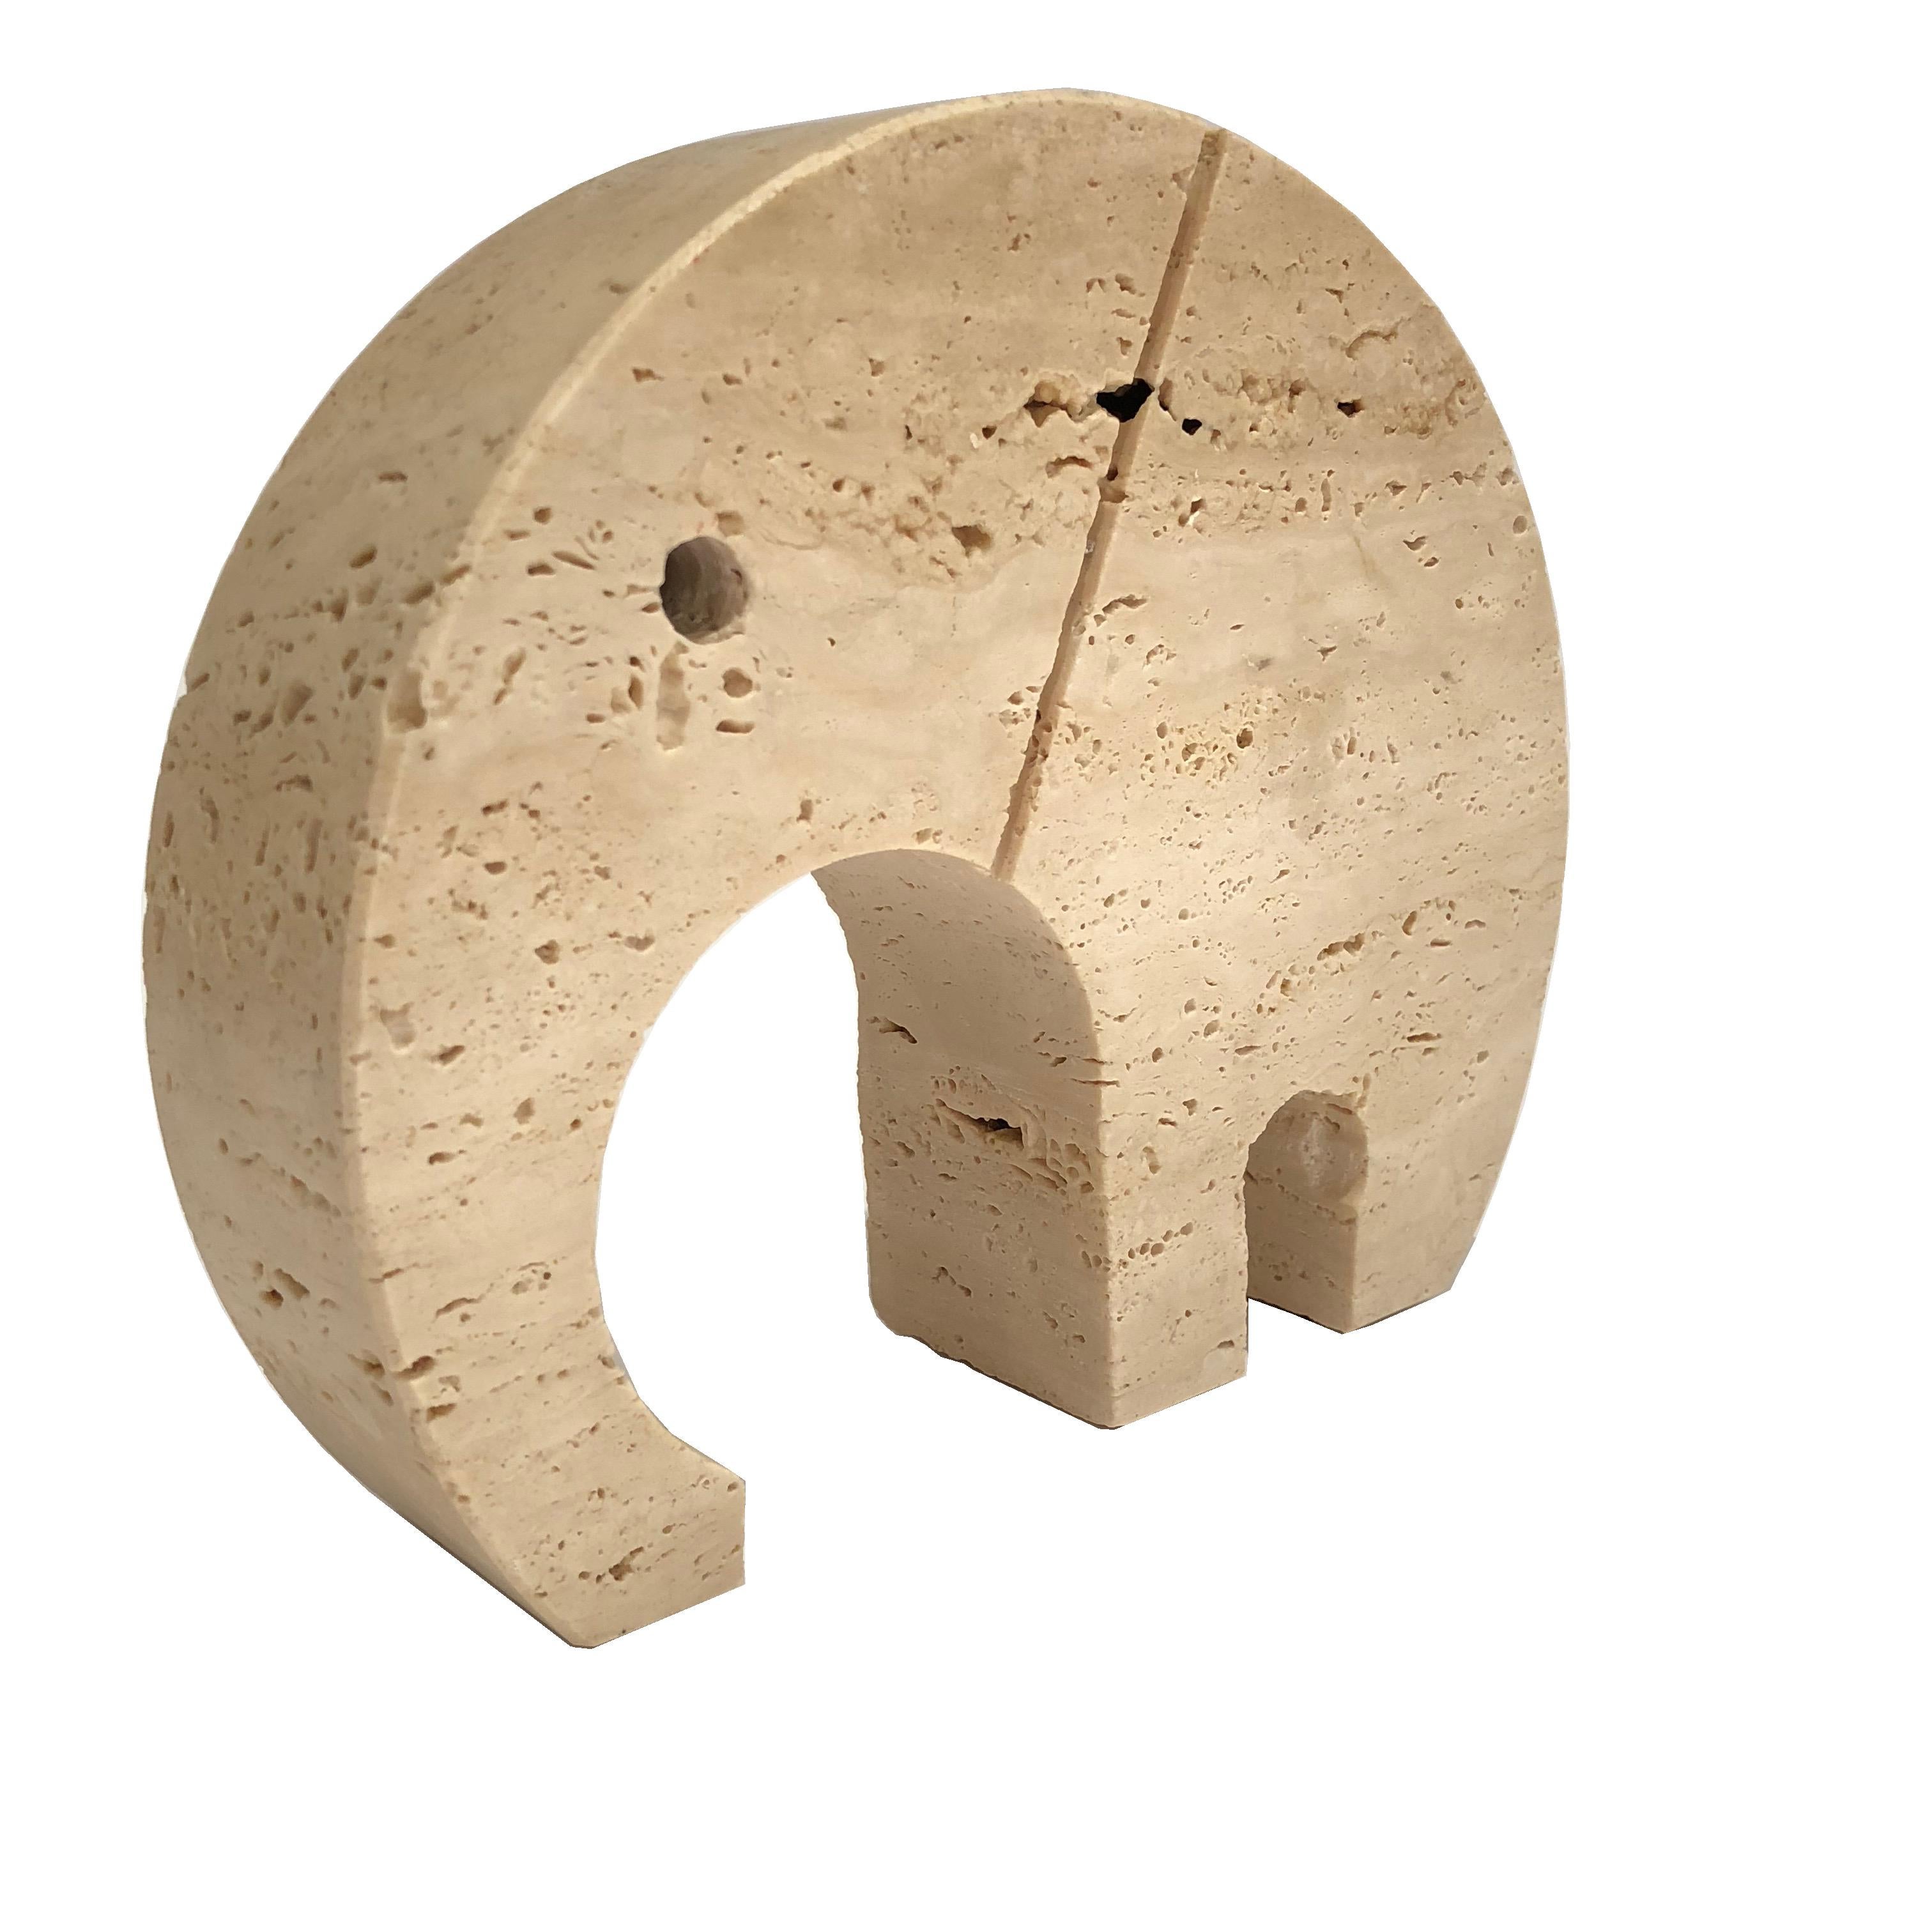 This midcentury travertine stone paperweight of a good luck elephant is by the designer Fratelli Manelli who worked the travertine. Great for a desk accessory or hallway entry.